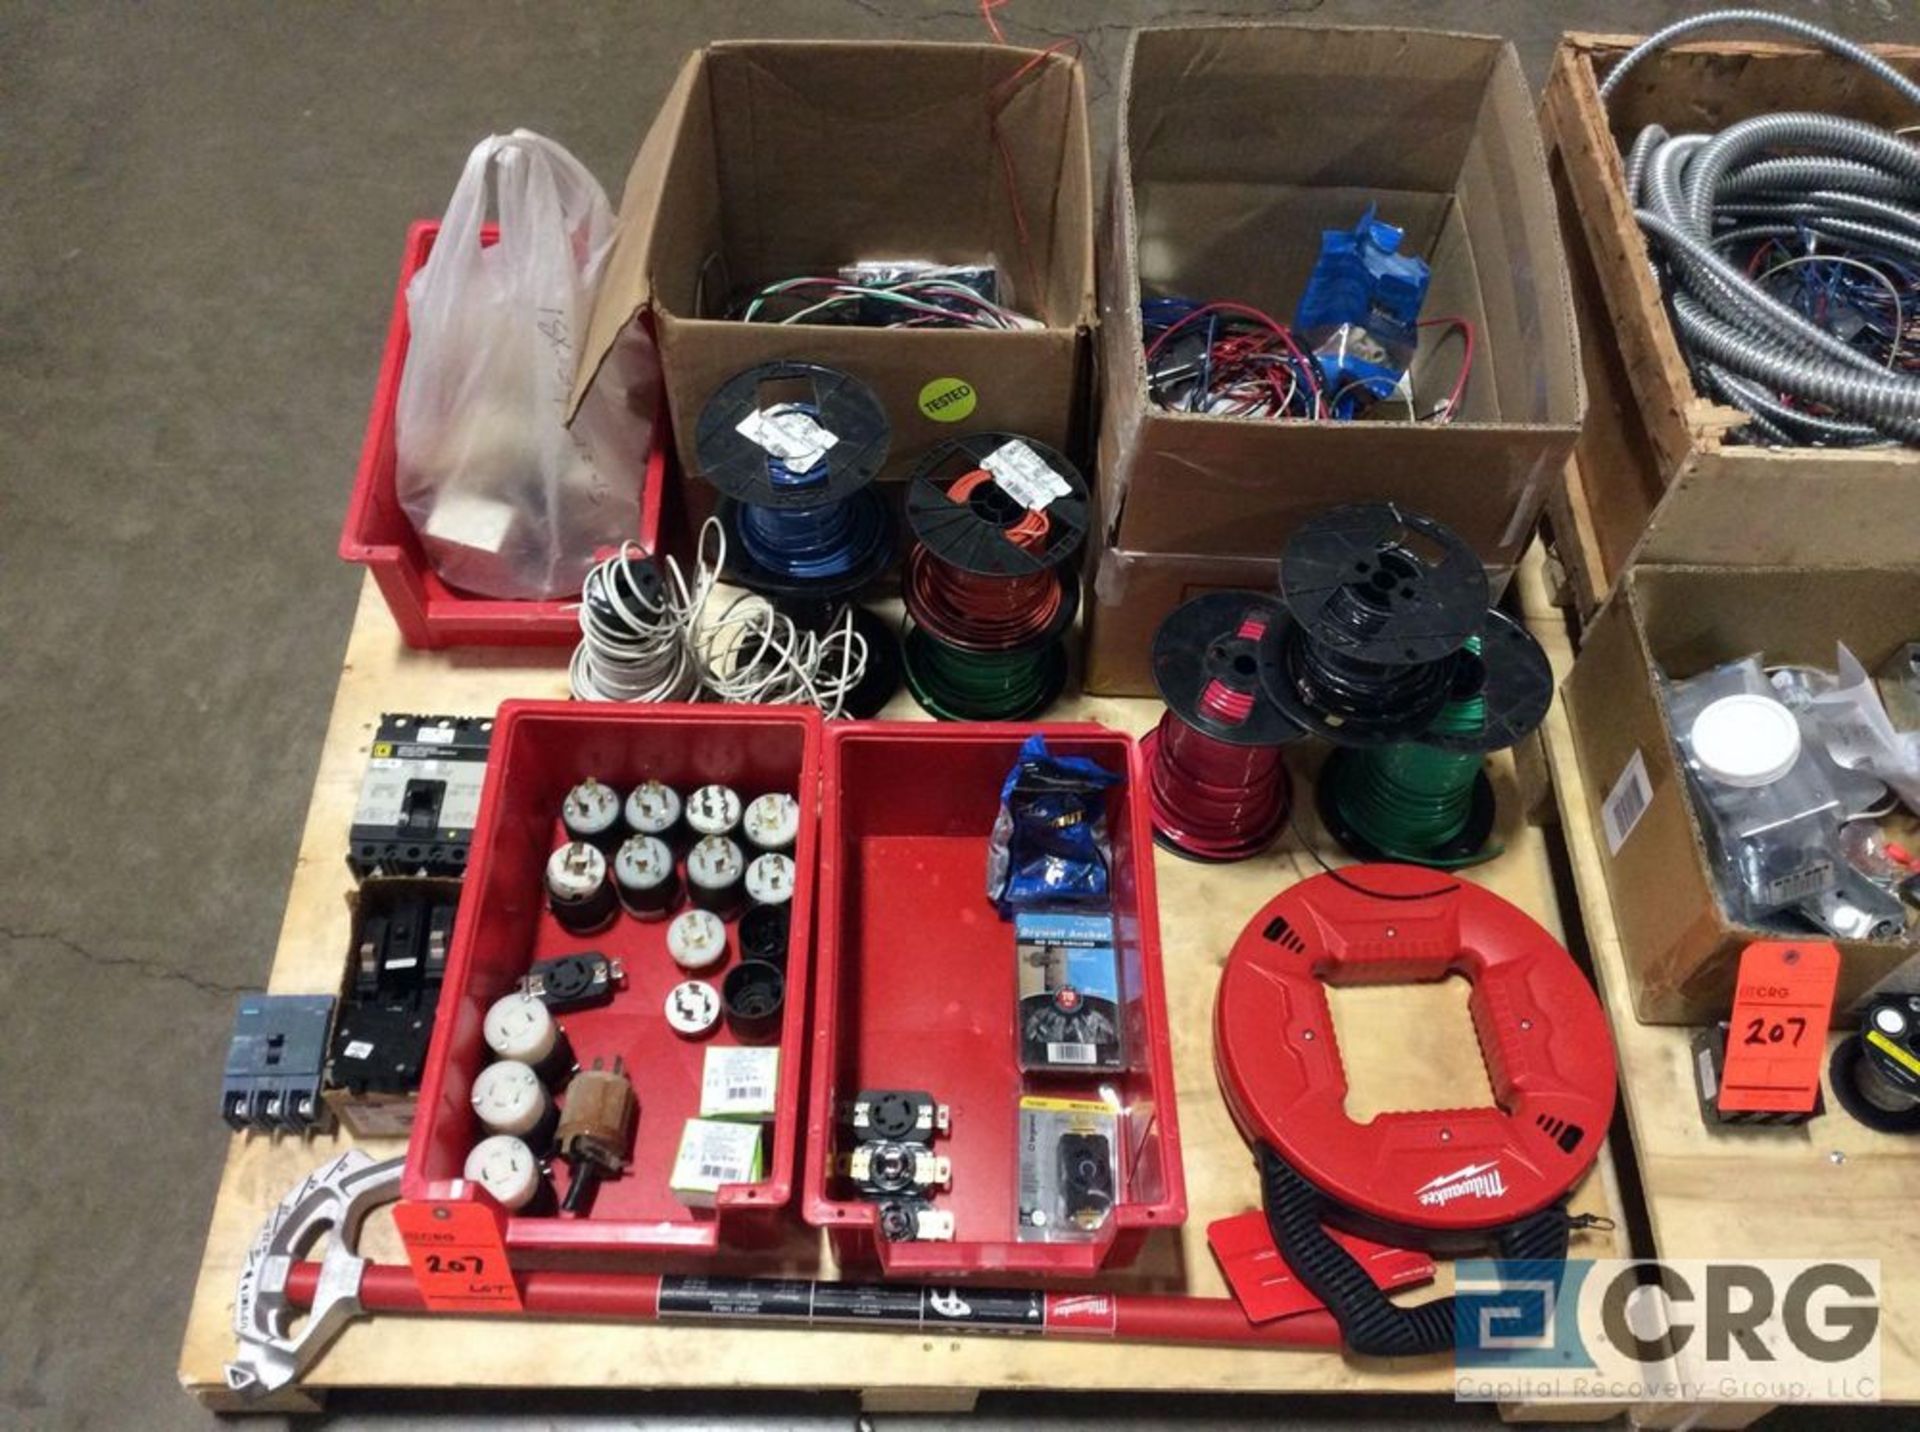 Lot of asst electrical supplies including spool wire, fish tape, bender, plugs, flex tube and boxes. - Image 2 of 3